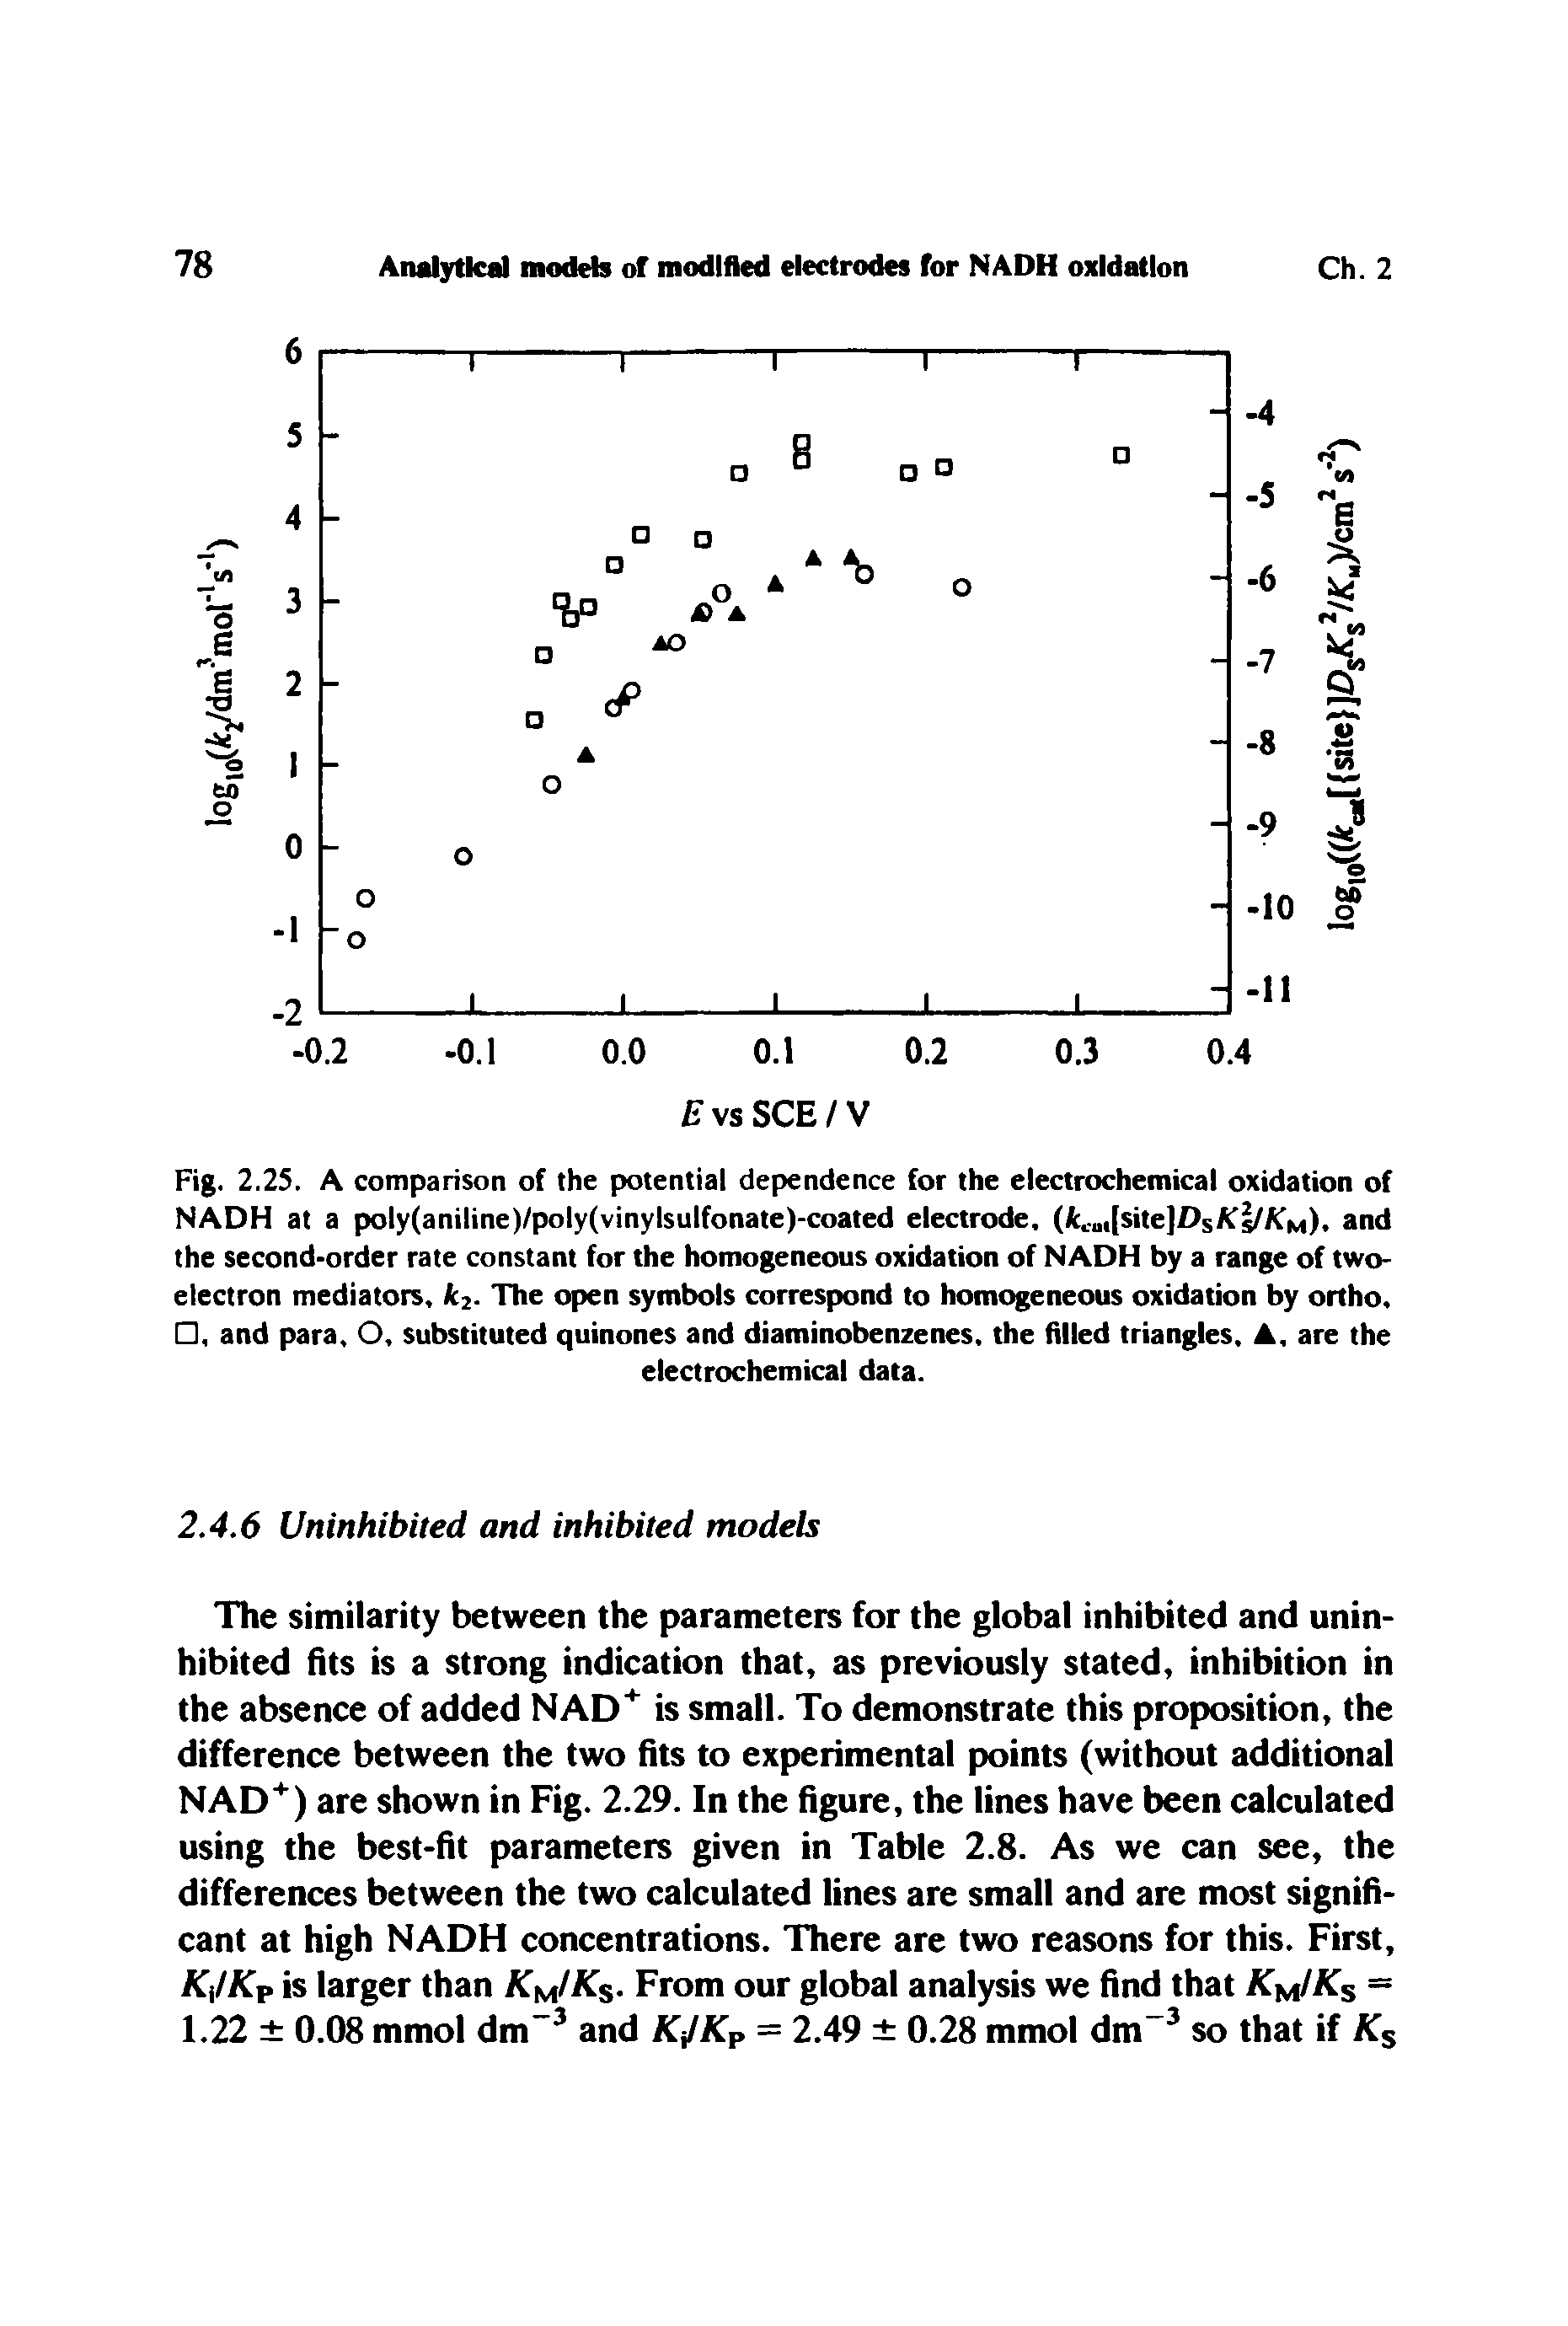 Fig. 2.2S. A comparison of the potential dependence for the electrochemical oxidation of NADH at a poly(aniline)/poly(vinylsulfonate)-coated electrode. (fccu,[site]Ds /AwM). and the second-order rate constant for the homogeneous oxidation of NADH by a range of two-electron mediators, k2- The open symbols correspond to homogeneous oxidation by ortho. , and para, O, substituted quinones and diaminobenzenes. the filled triangles. , are the...